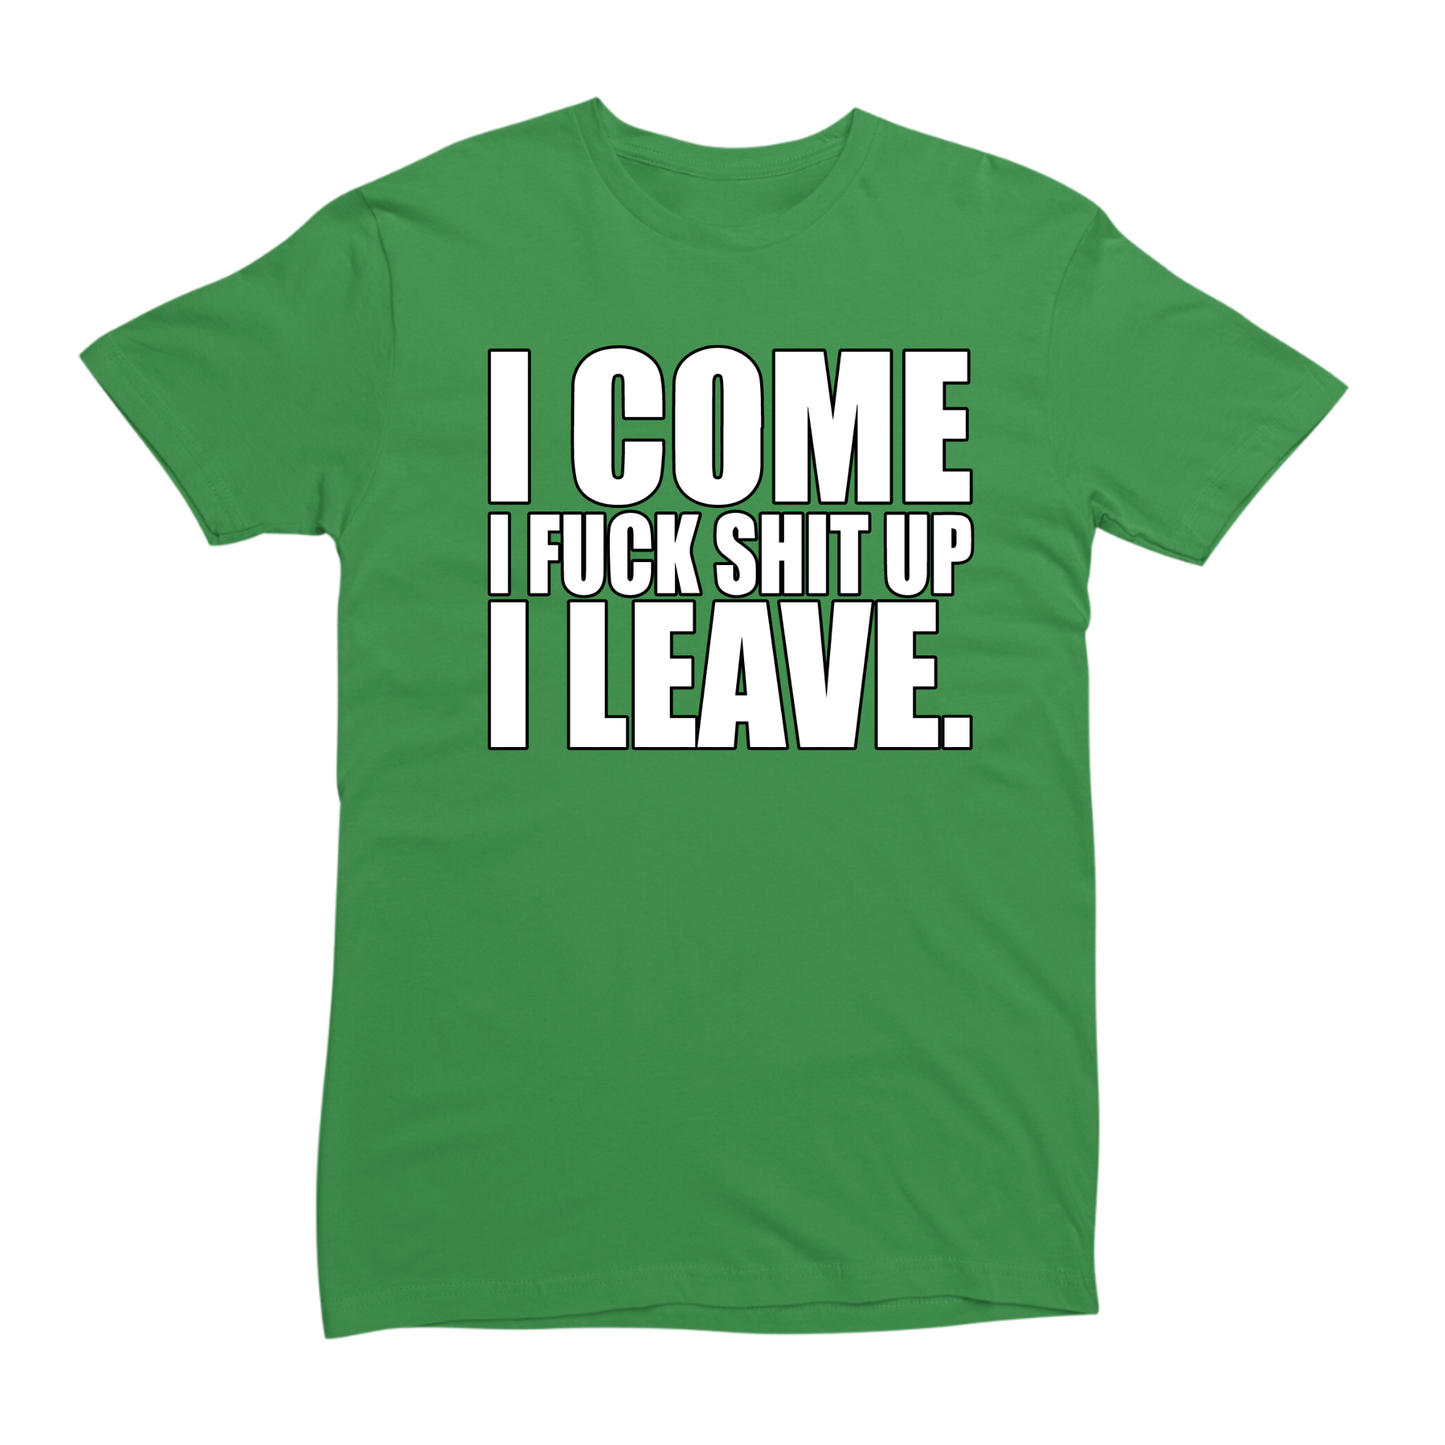 Come, Fuck Shit Up, Leave T-shirt